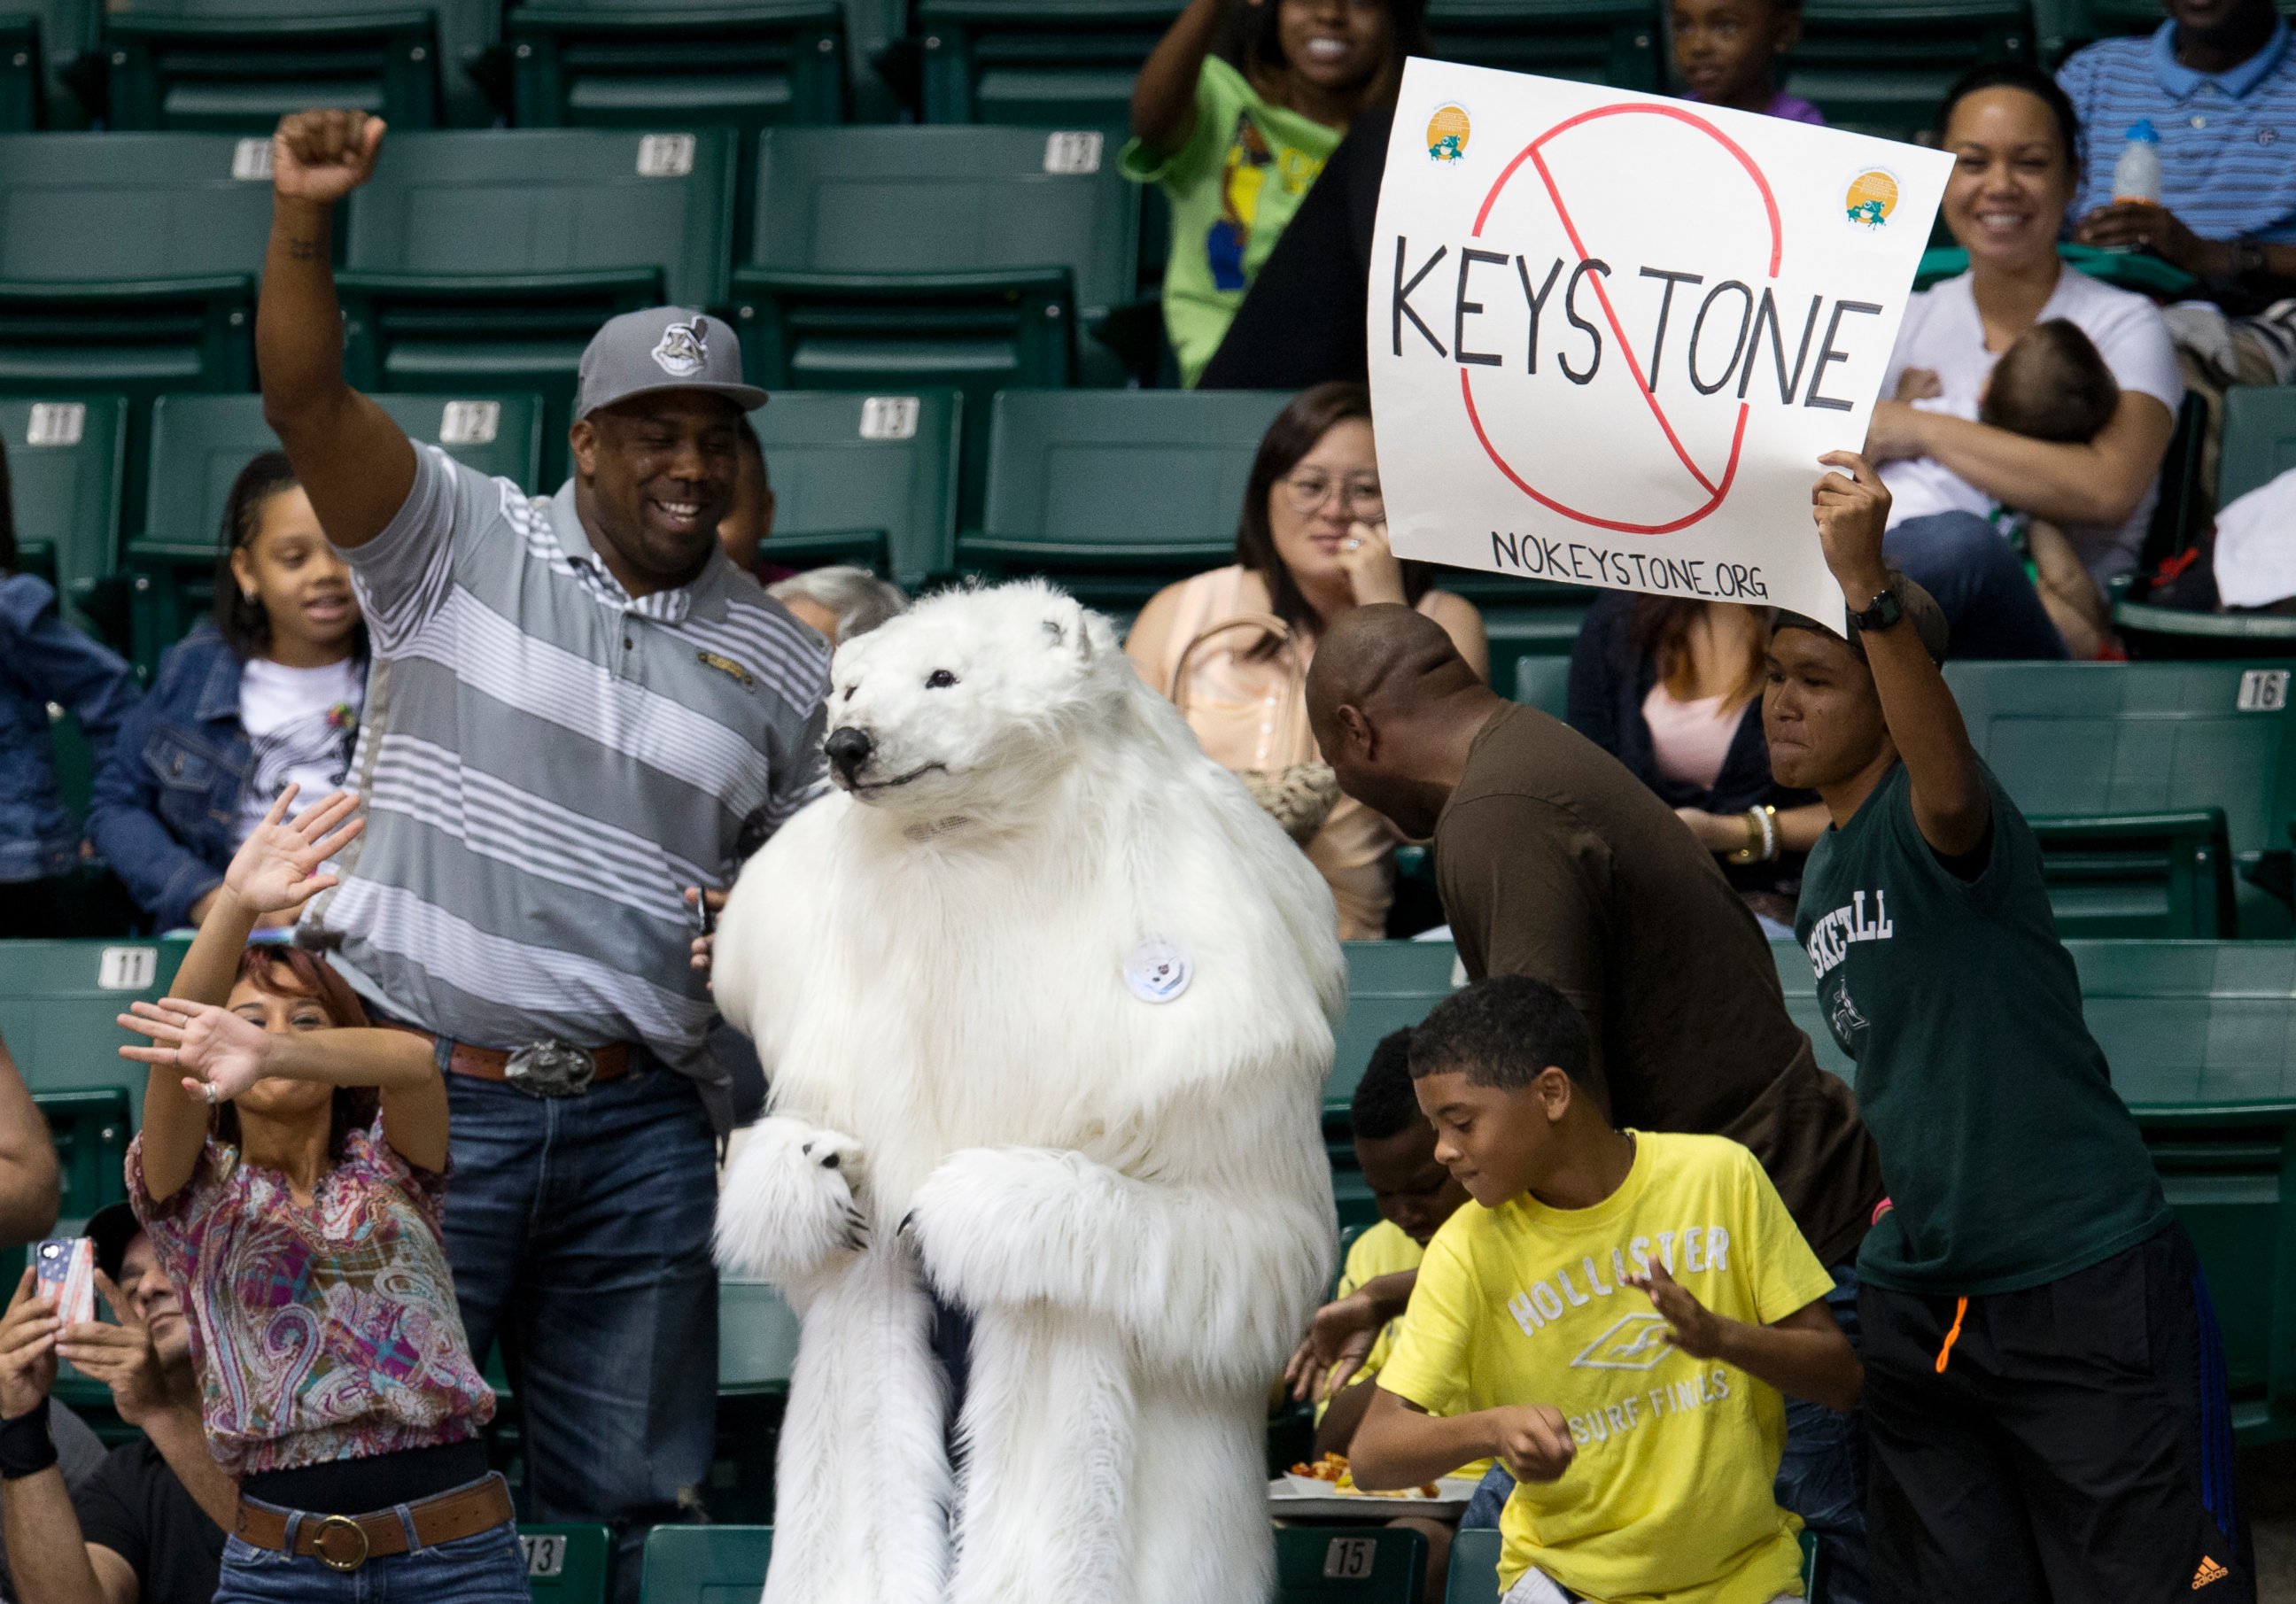 PHOTO: A person dressed as a polar bear and others demonstrate against the Keystone Pipeline as President Barack Obama attends the Oregon State University versus University of Akron college basketball game in Honolulu, Dec. 22, 2013.